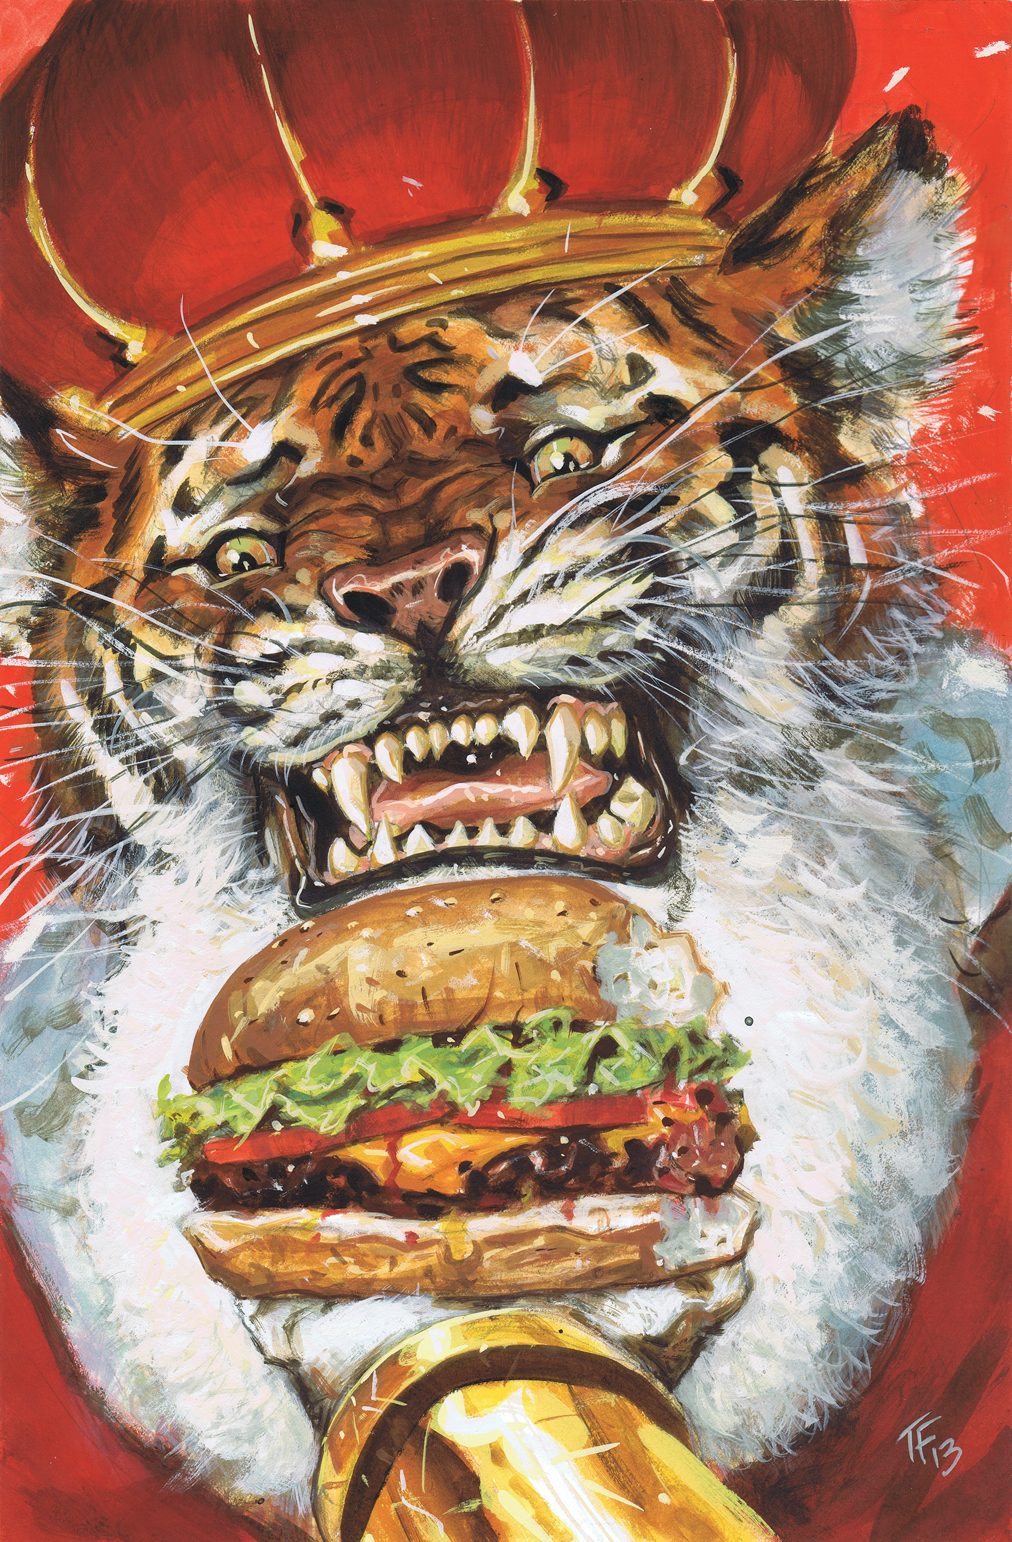 Tom Cat and Giant Realistic Flying Tiger eating Hot Dogs : r/tigerpics